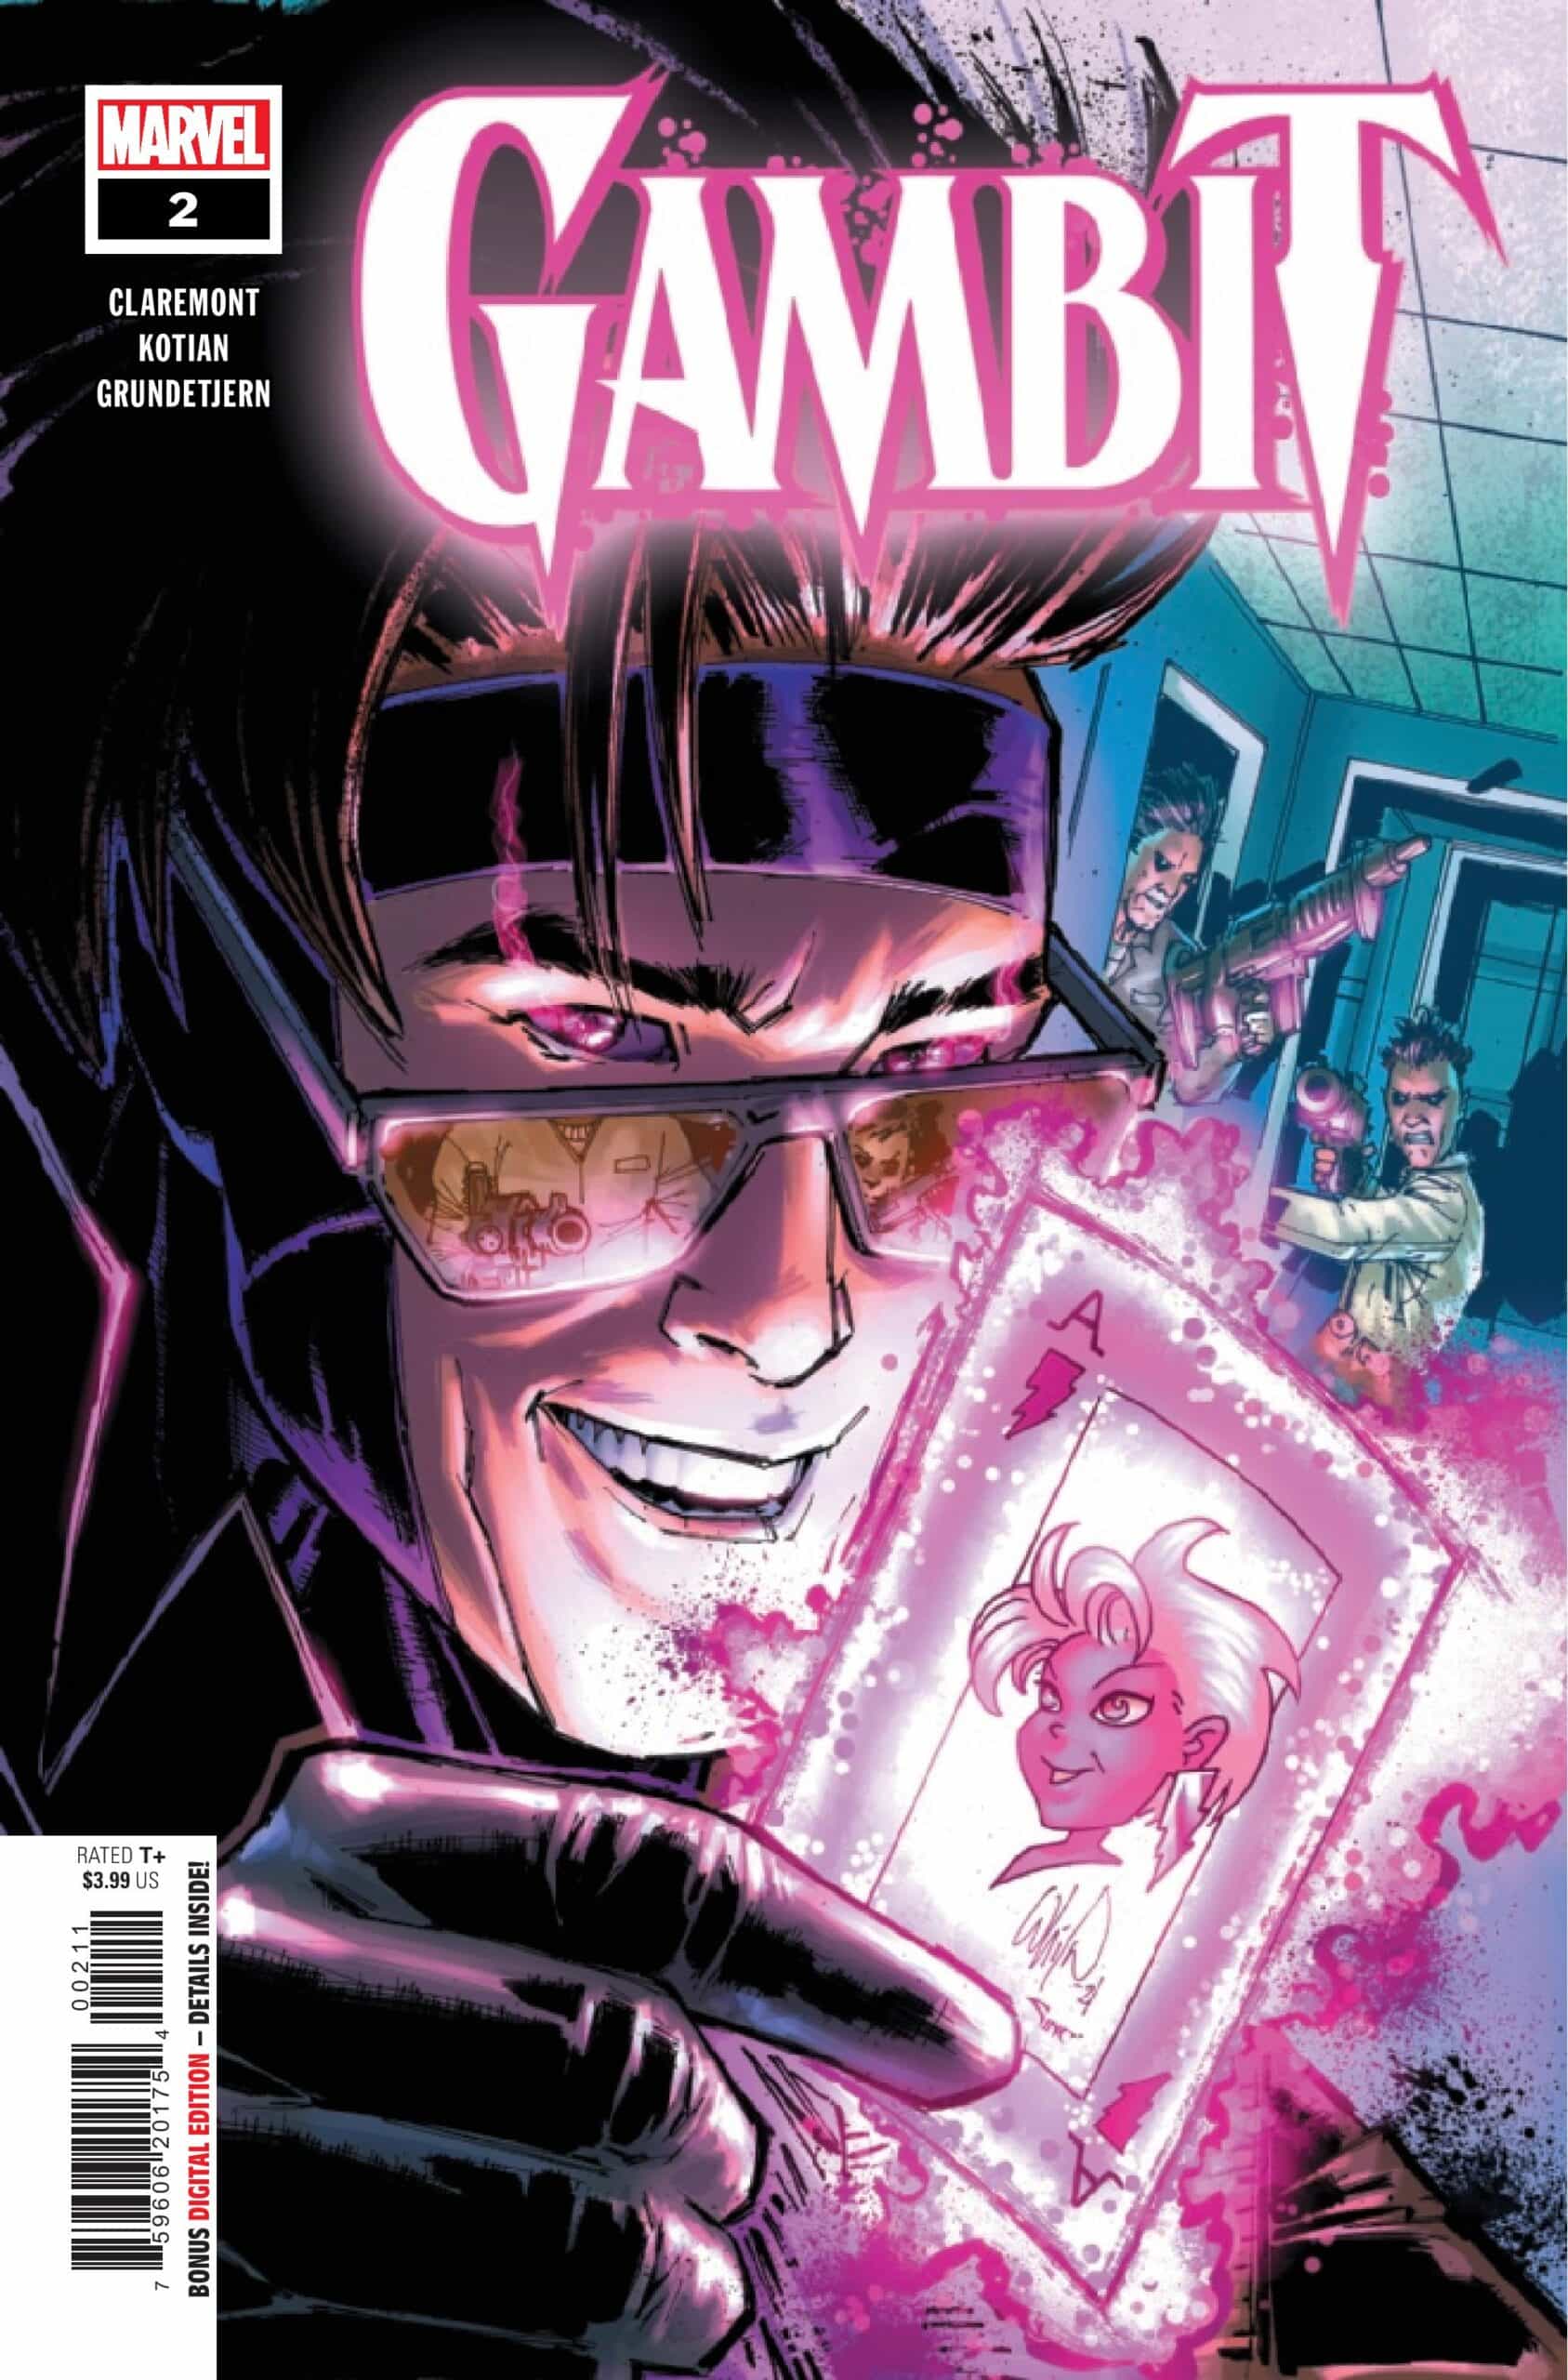 Mourn The Death Of Gambit In Our Exclusive Preview Of Knights Of X #4 -  ComicsXF